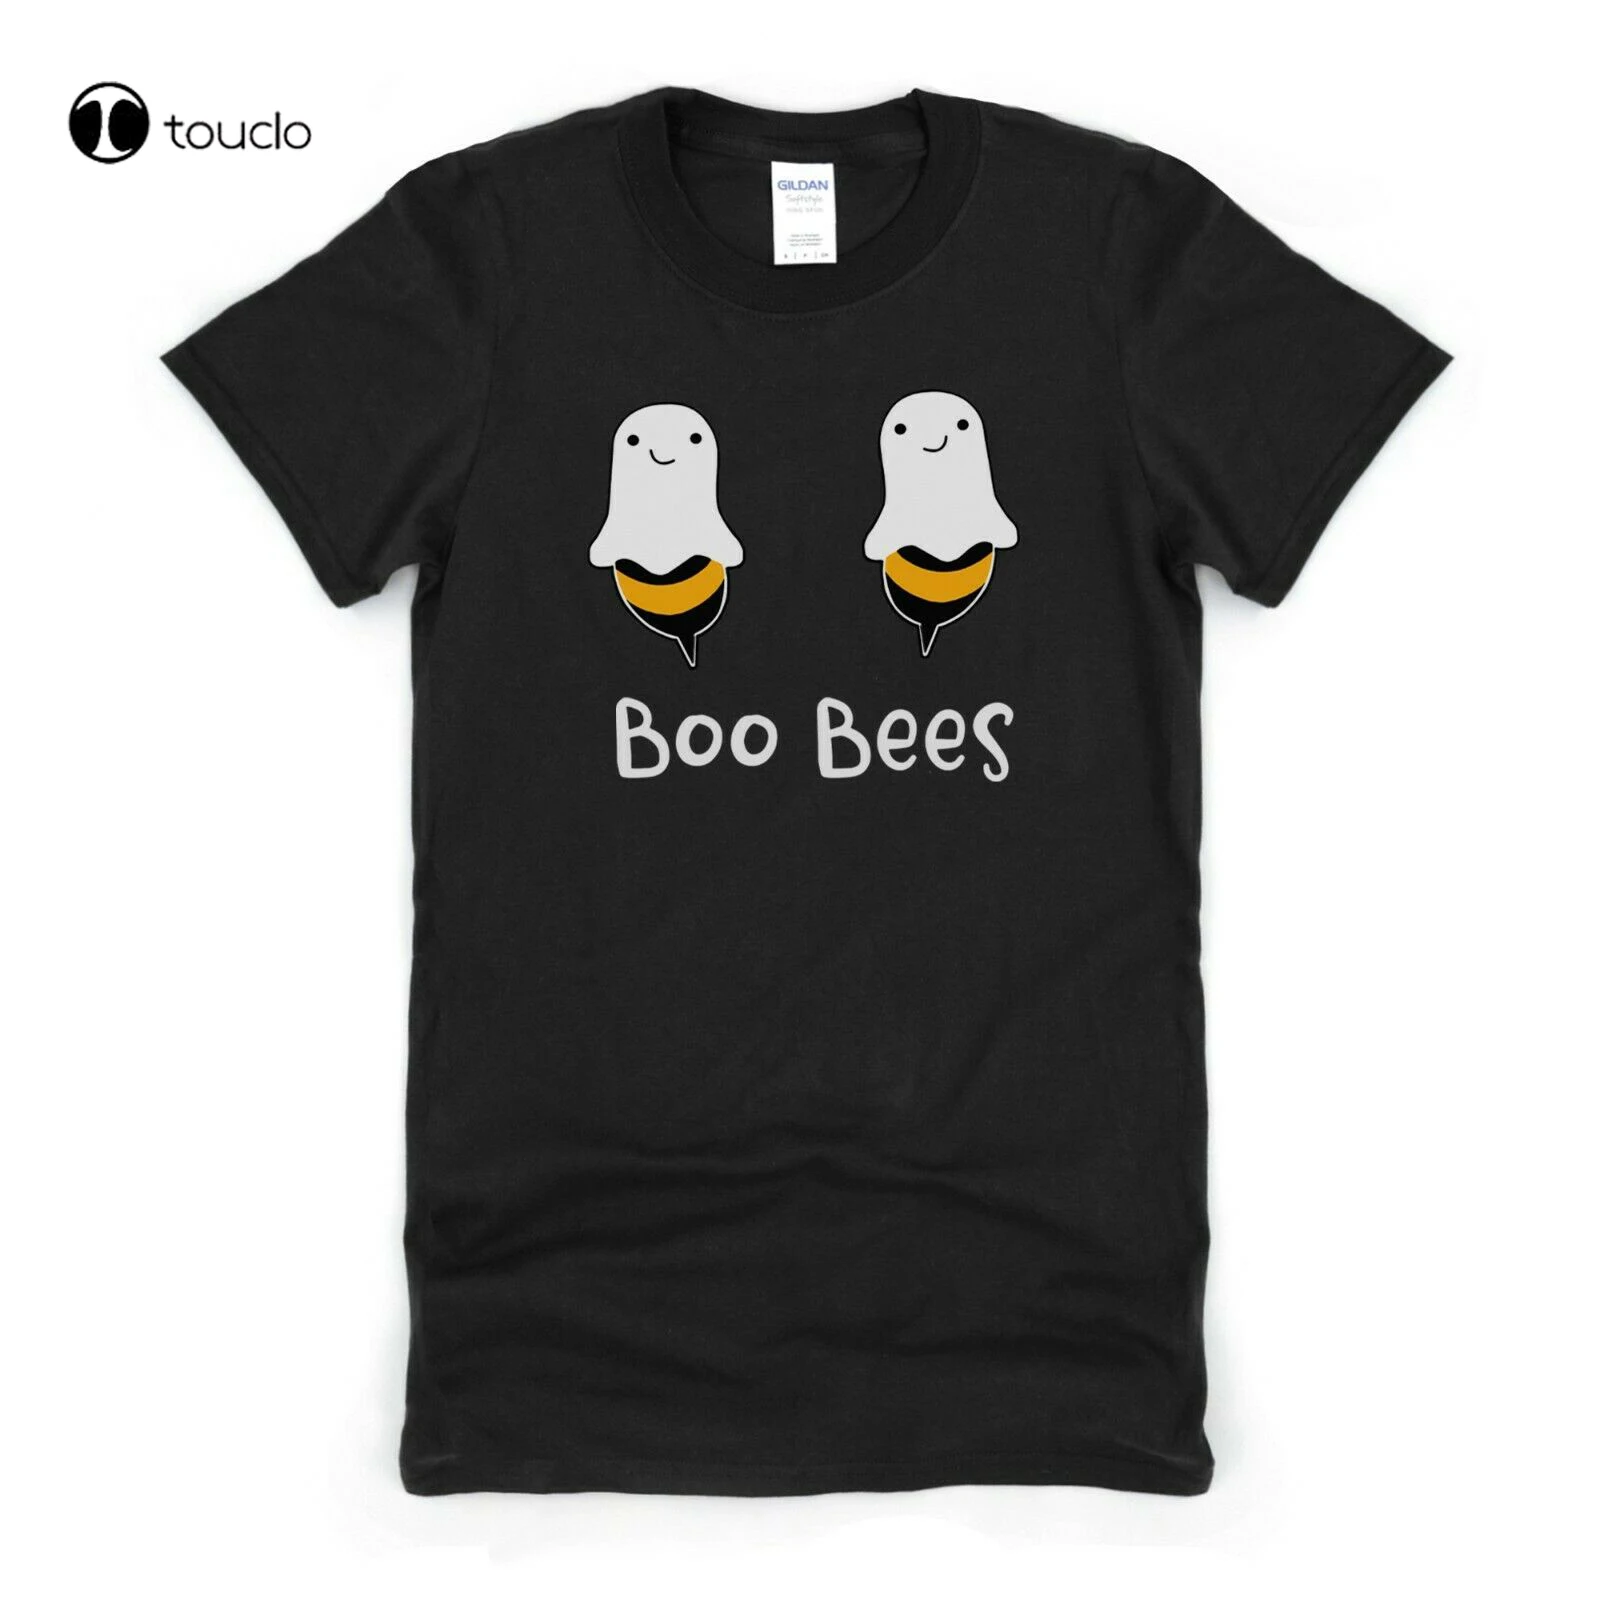 

Womens Boo Bees Funny Halloween T Shirt For Ladies Fancy Top Dress Costume Ideas cute shirts for teen girls